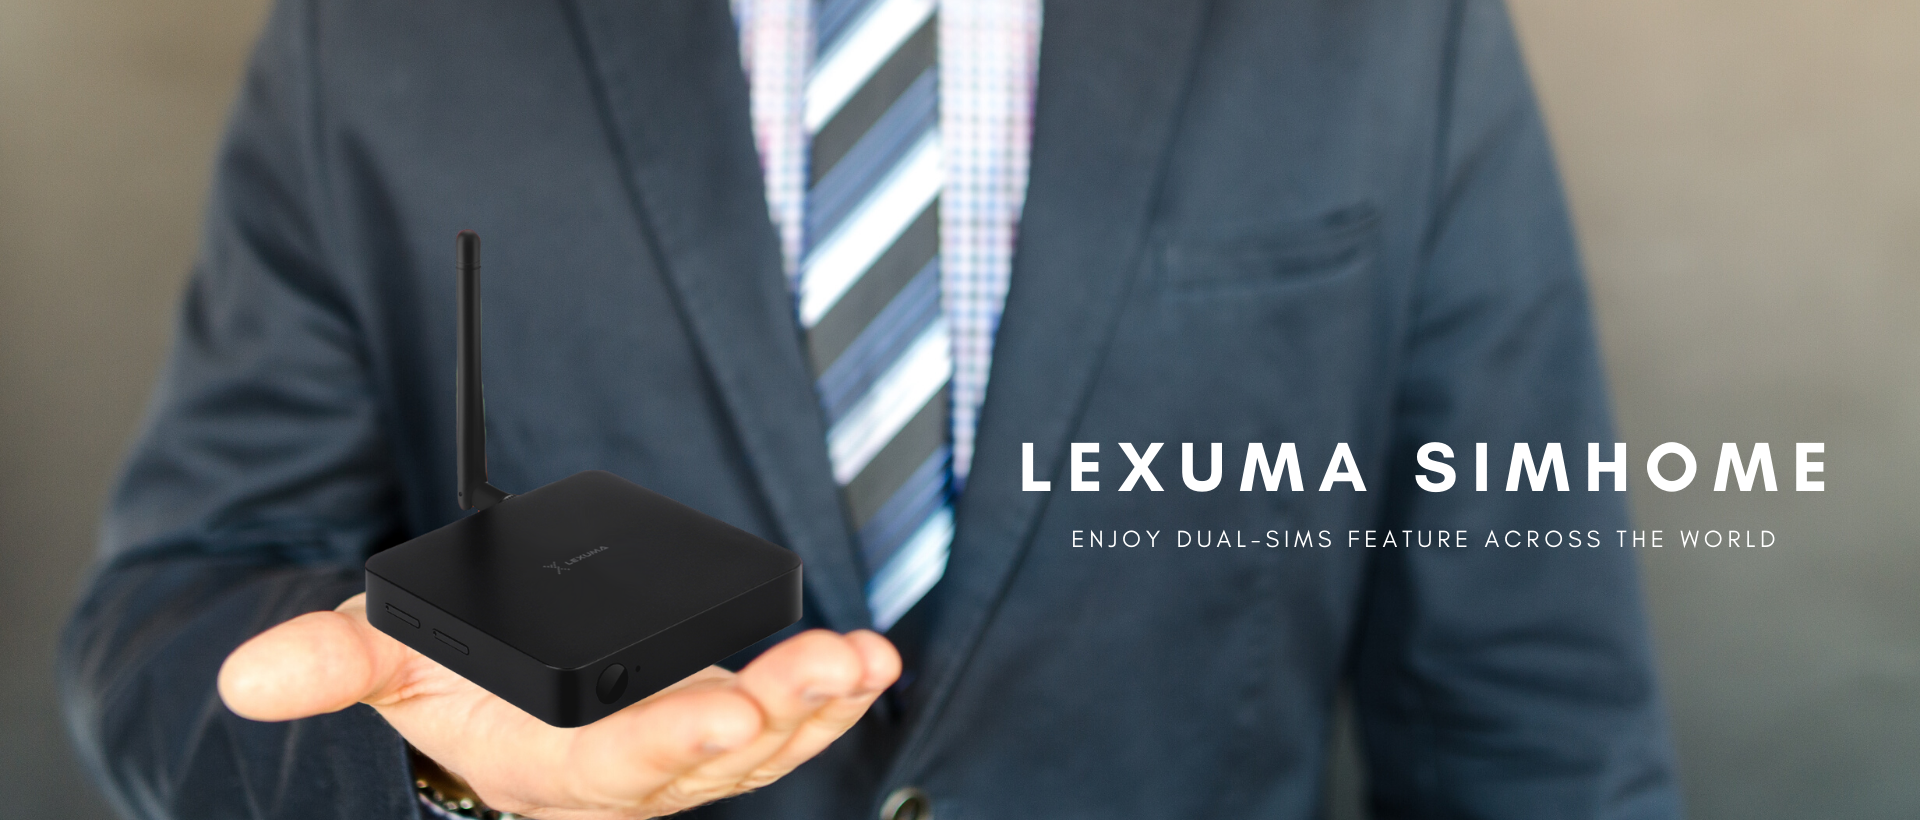 lexuma-simhome-dual-sim-standby-roaming-gateway-adapter-router-banner-business-trip-travel